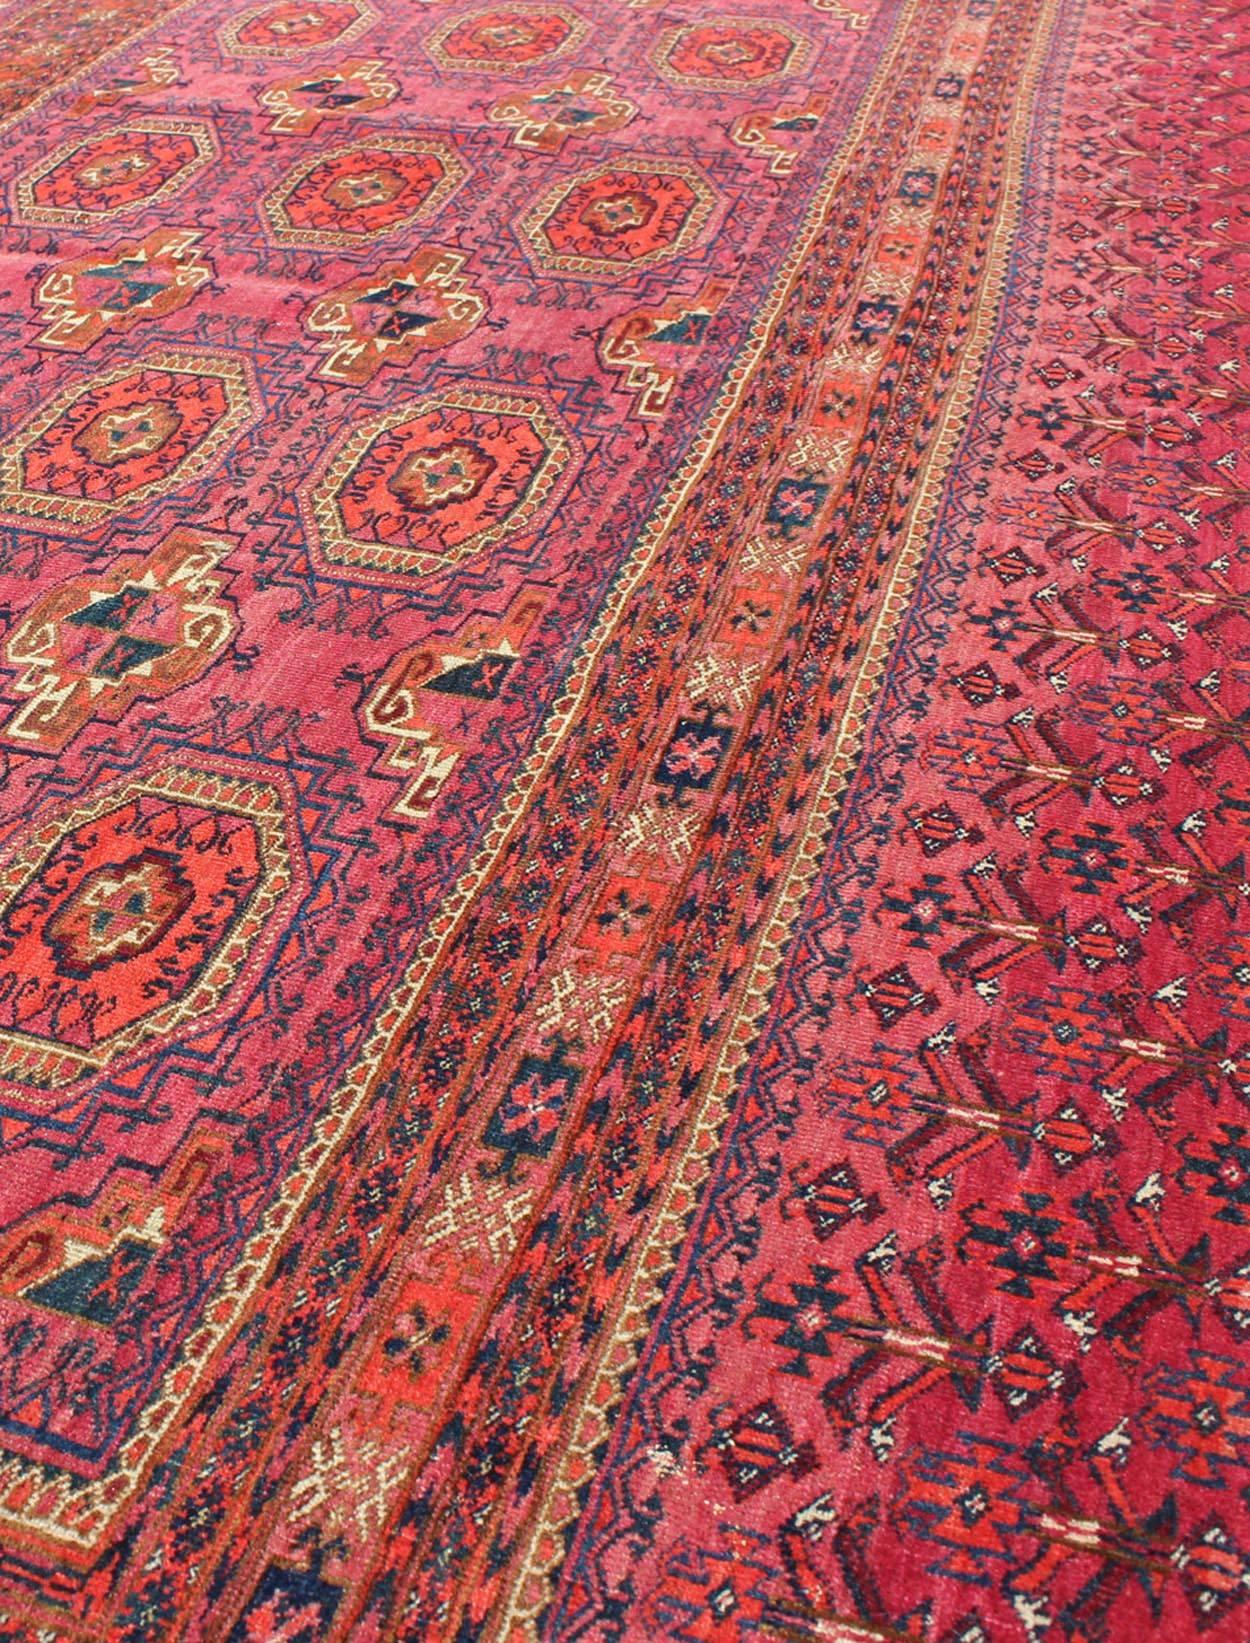 Hand-Knotted Antique Turkoman Tekke Rug with Repeating Medallion Design in Fuchsia